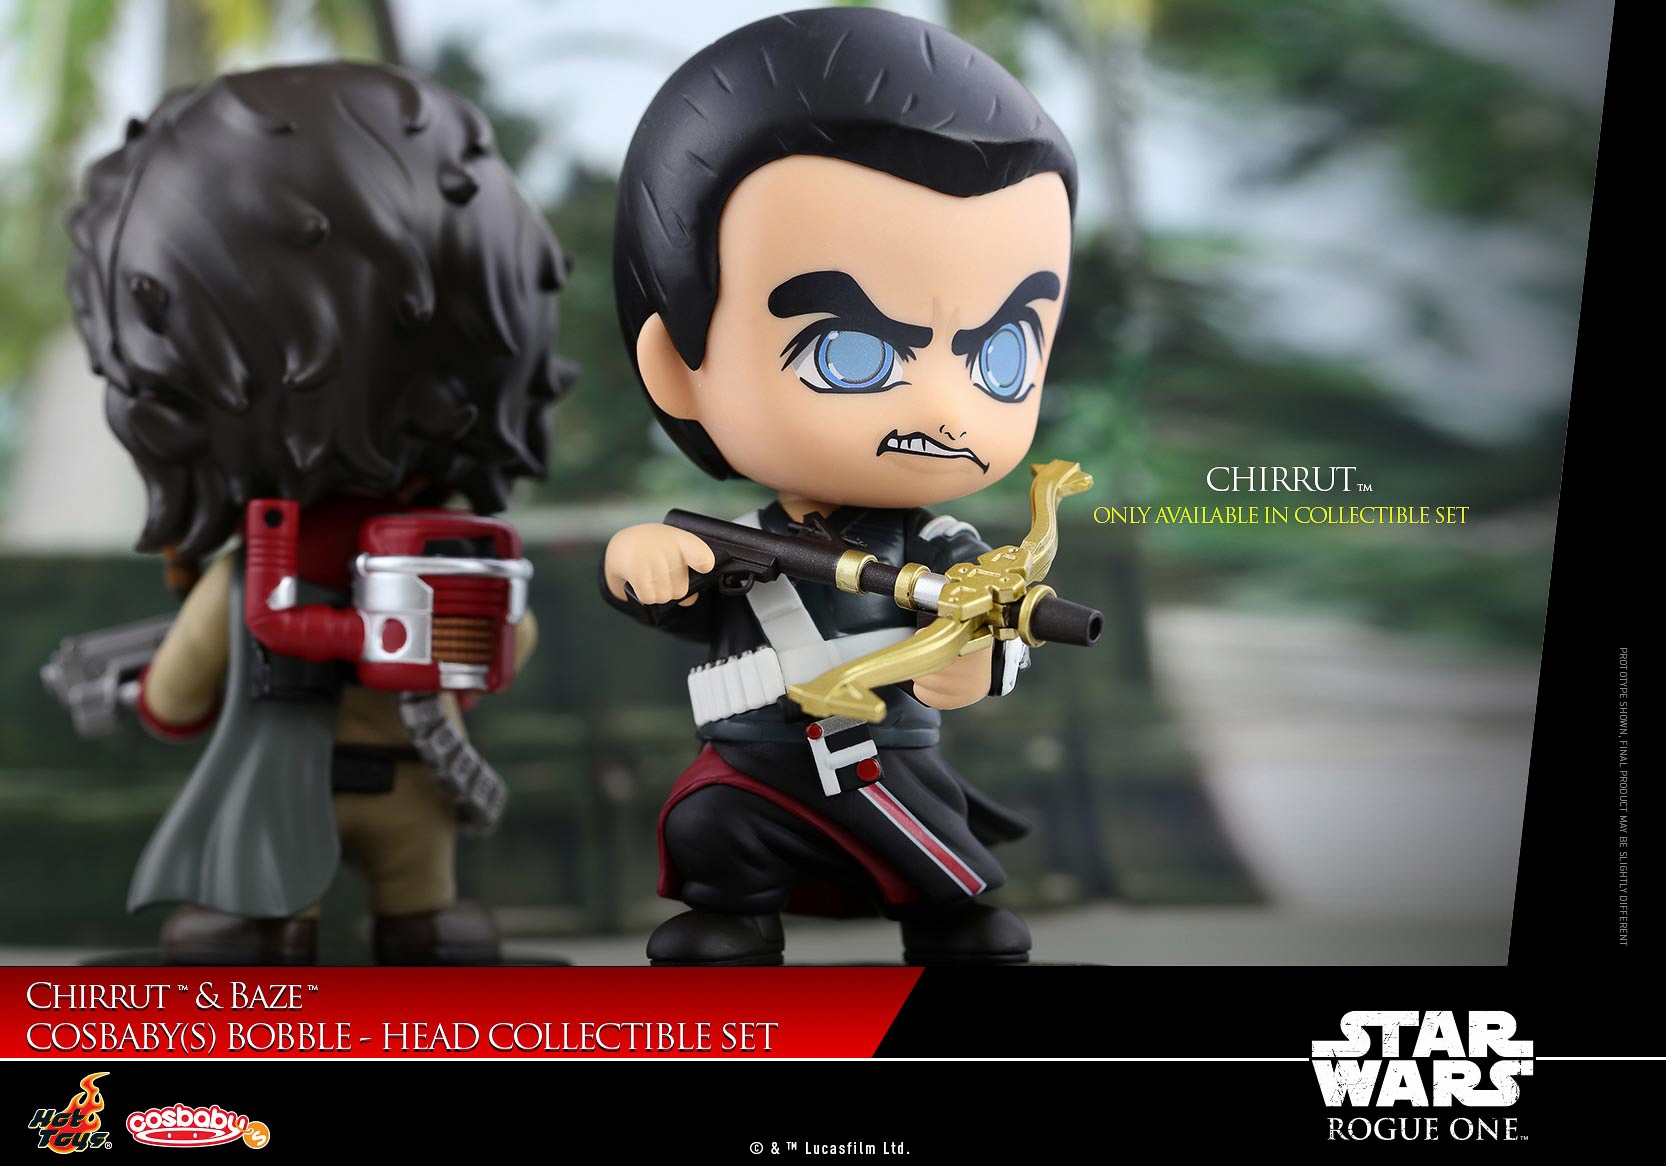 Hot-Toys-Rogue-One-A-Star-Wars-Story-Baze-Chirrut-Cosbaby-006.jpg